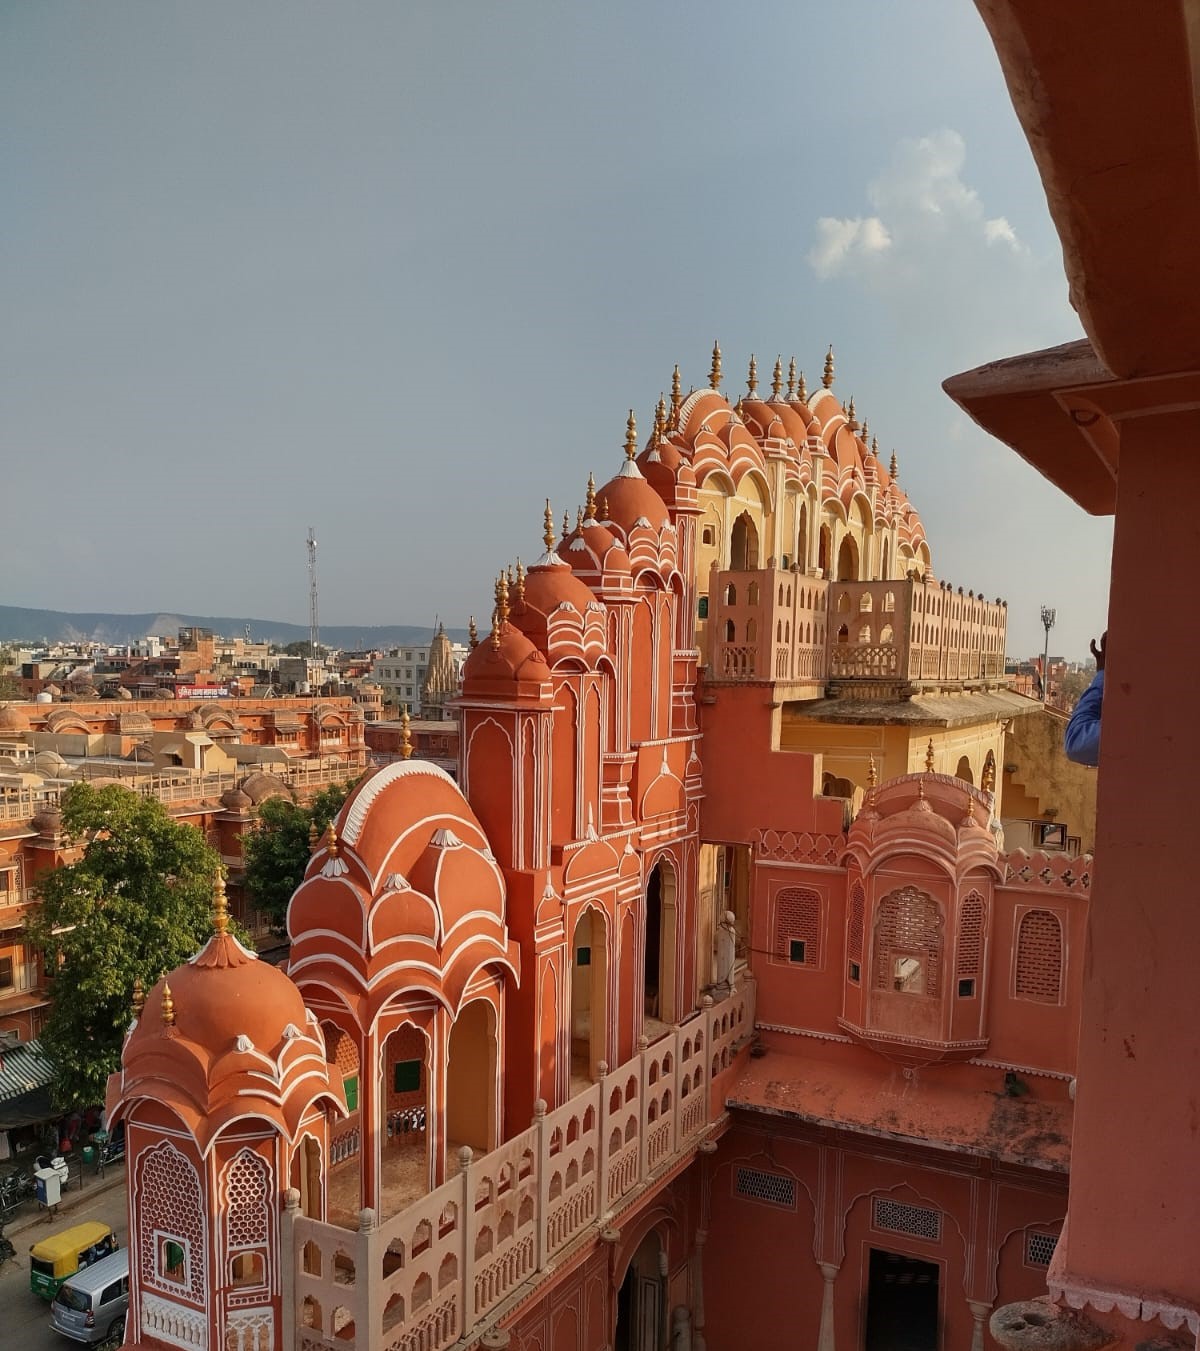 Hawa Mahal - The Centre of Attraction in Jaipur